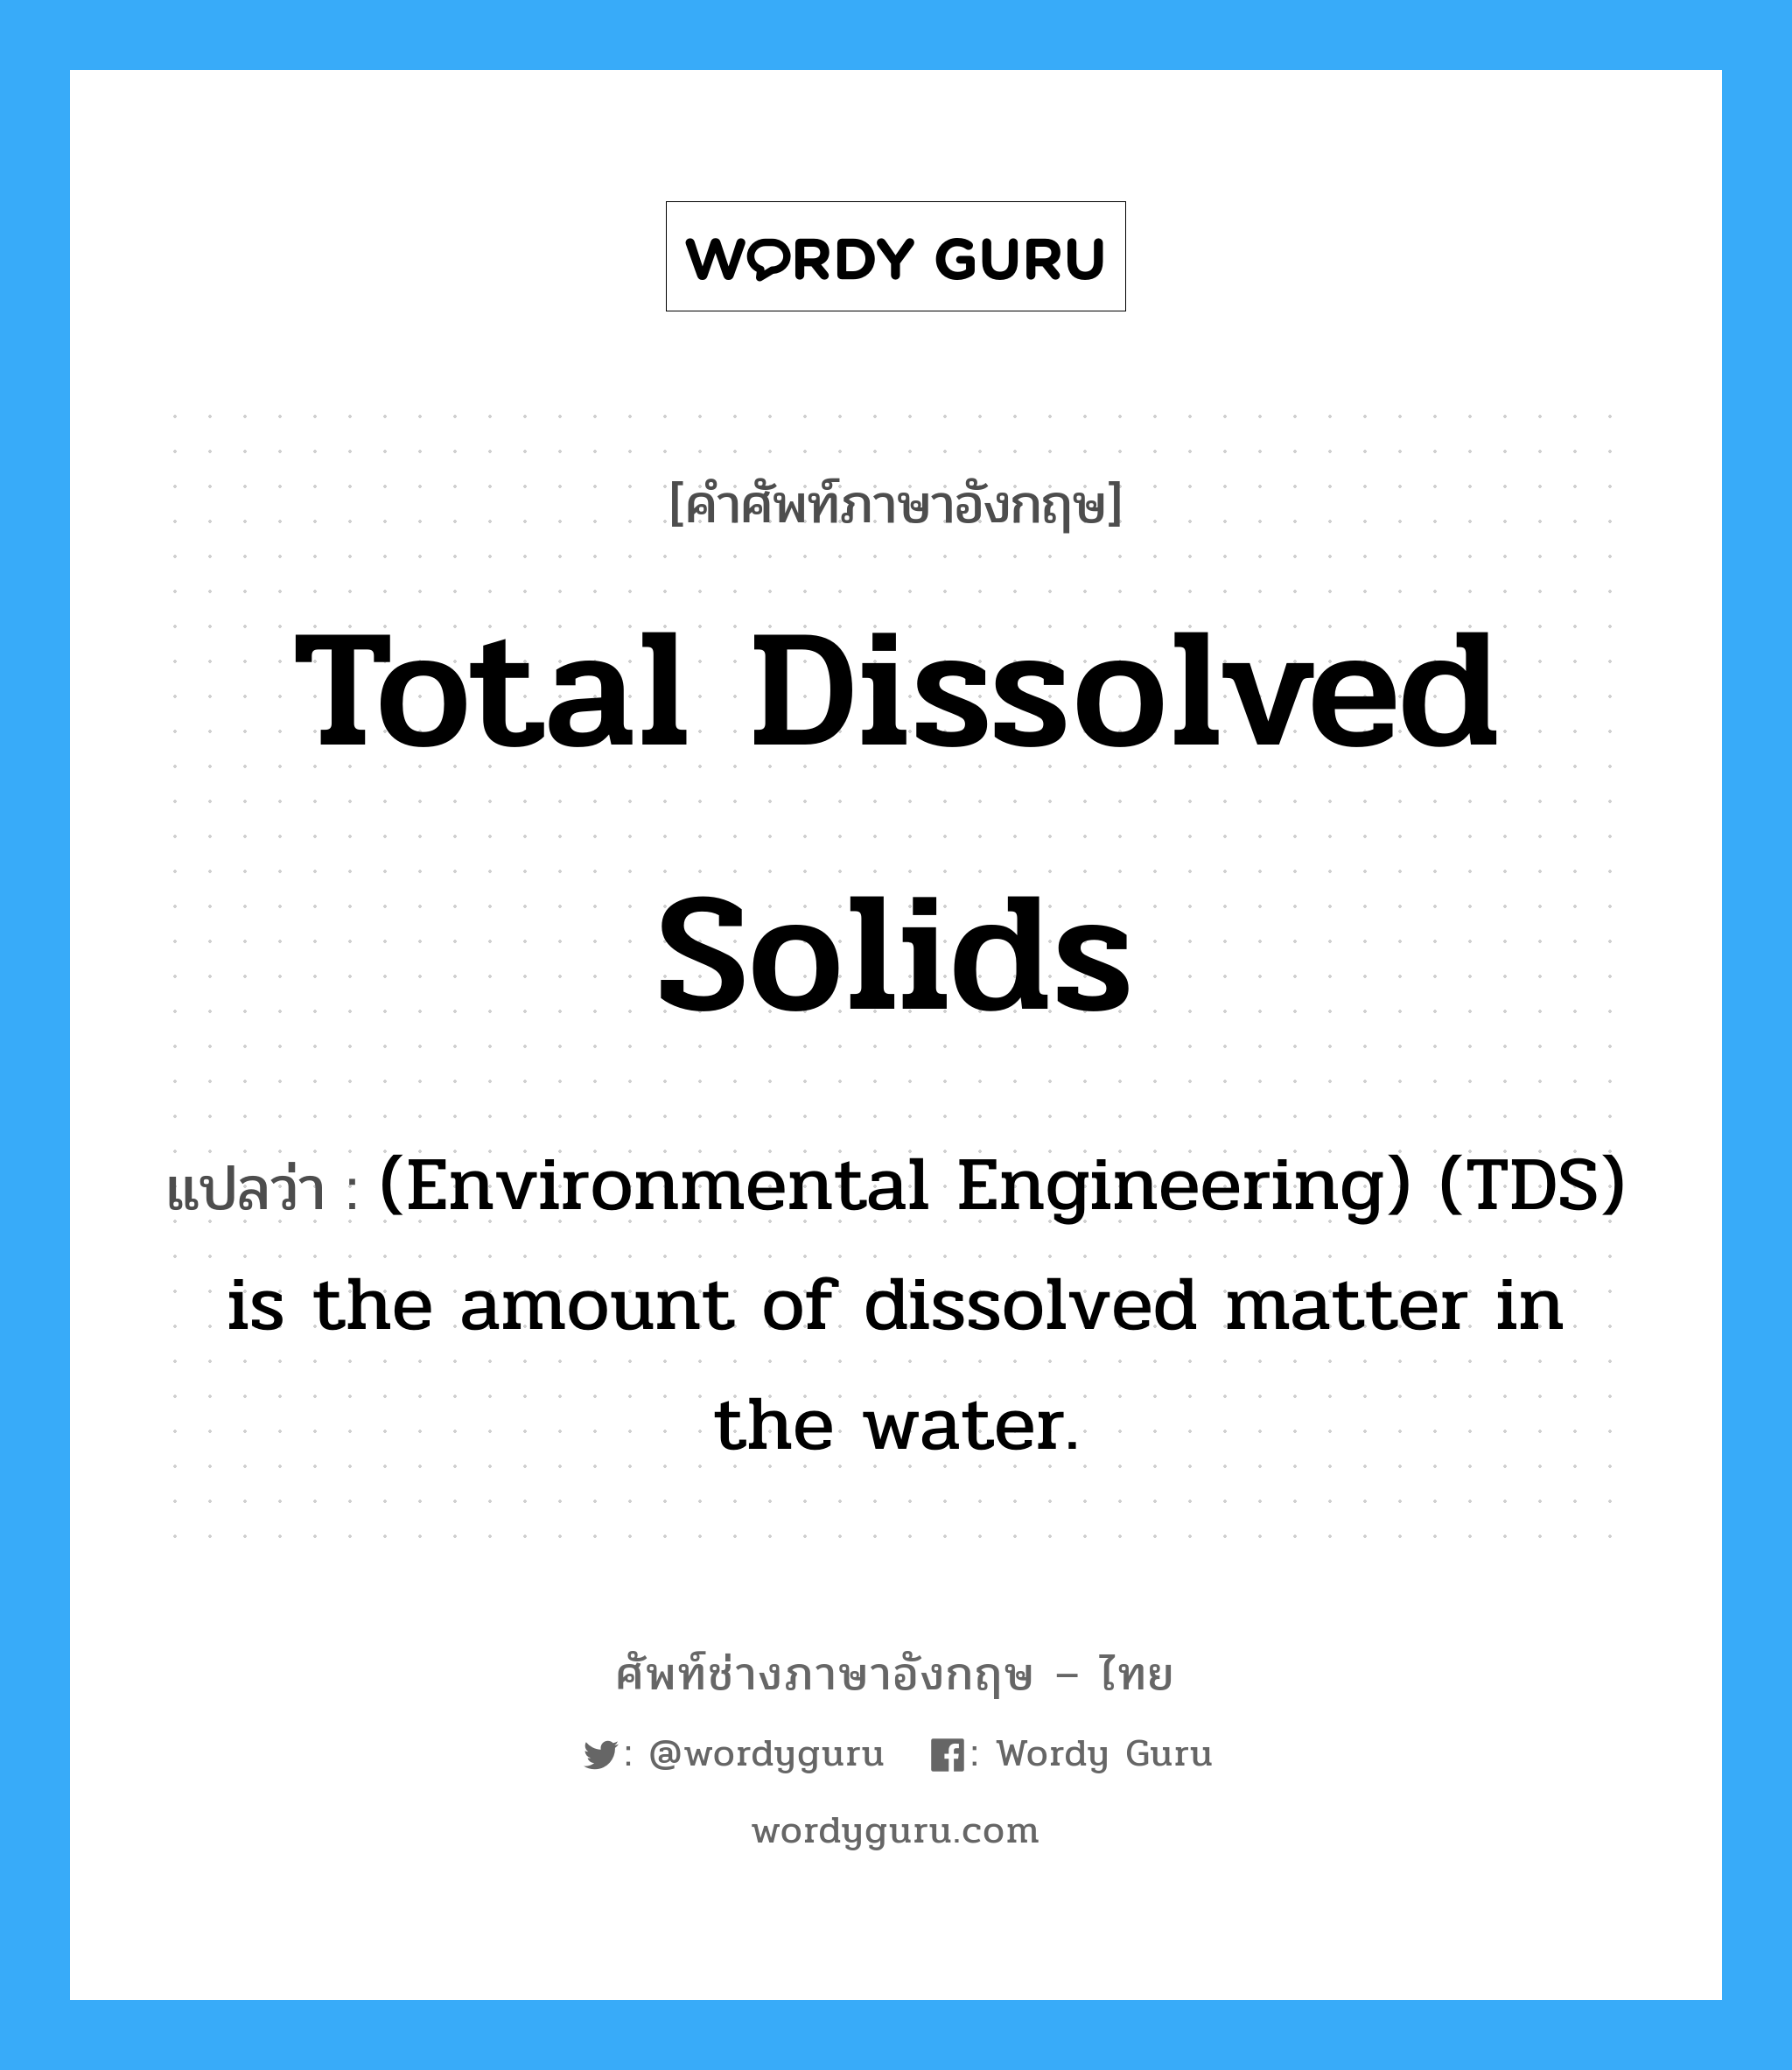 Total dissolved solids แปลว่า?, คำศัพท์ช่างภาษาอังกฤษ - ไทย Total dissolved solids คำศัพท์ภาษาอังกฤษ Total dissolved solids แปลว่า (Environmental Engineering) (TDS) is the amount of dissolved matter in the water.